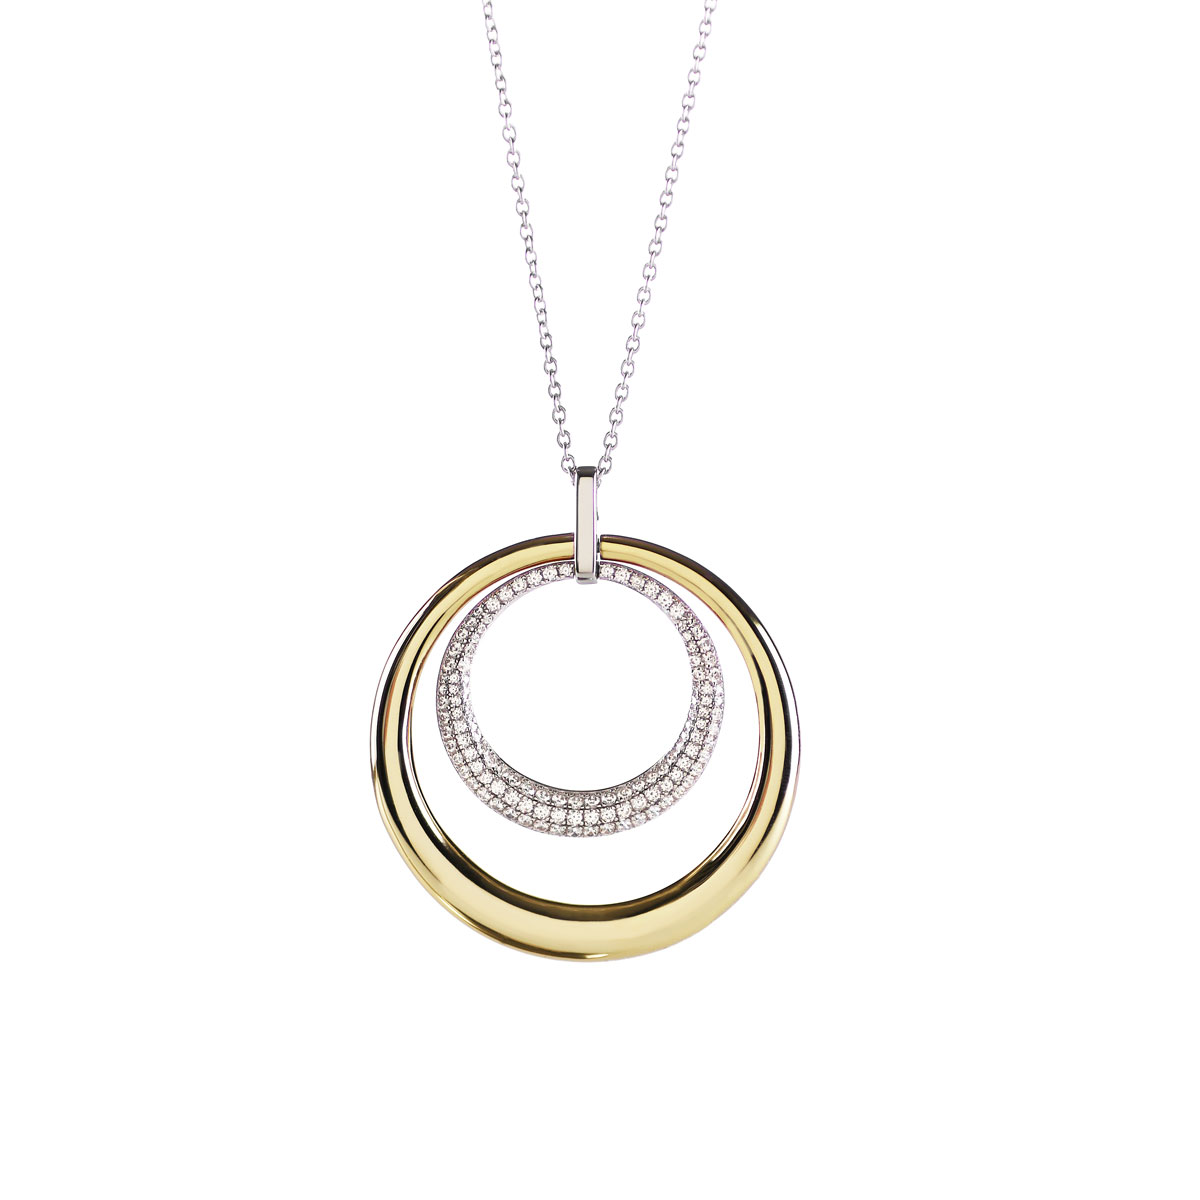 Cashs Ireland, Ella Gold and Crystal Double Round Pendant Necklace